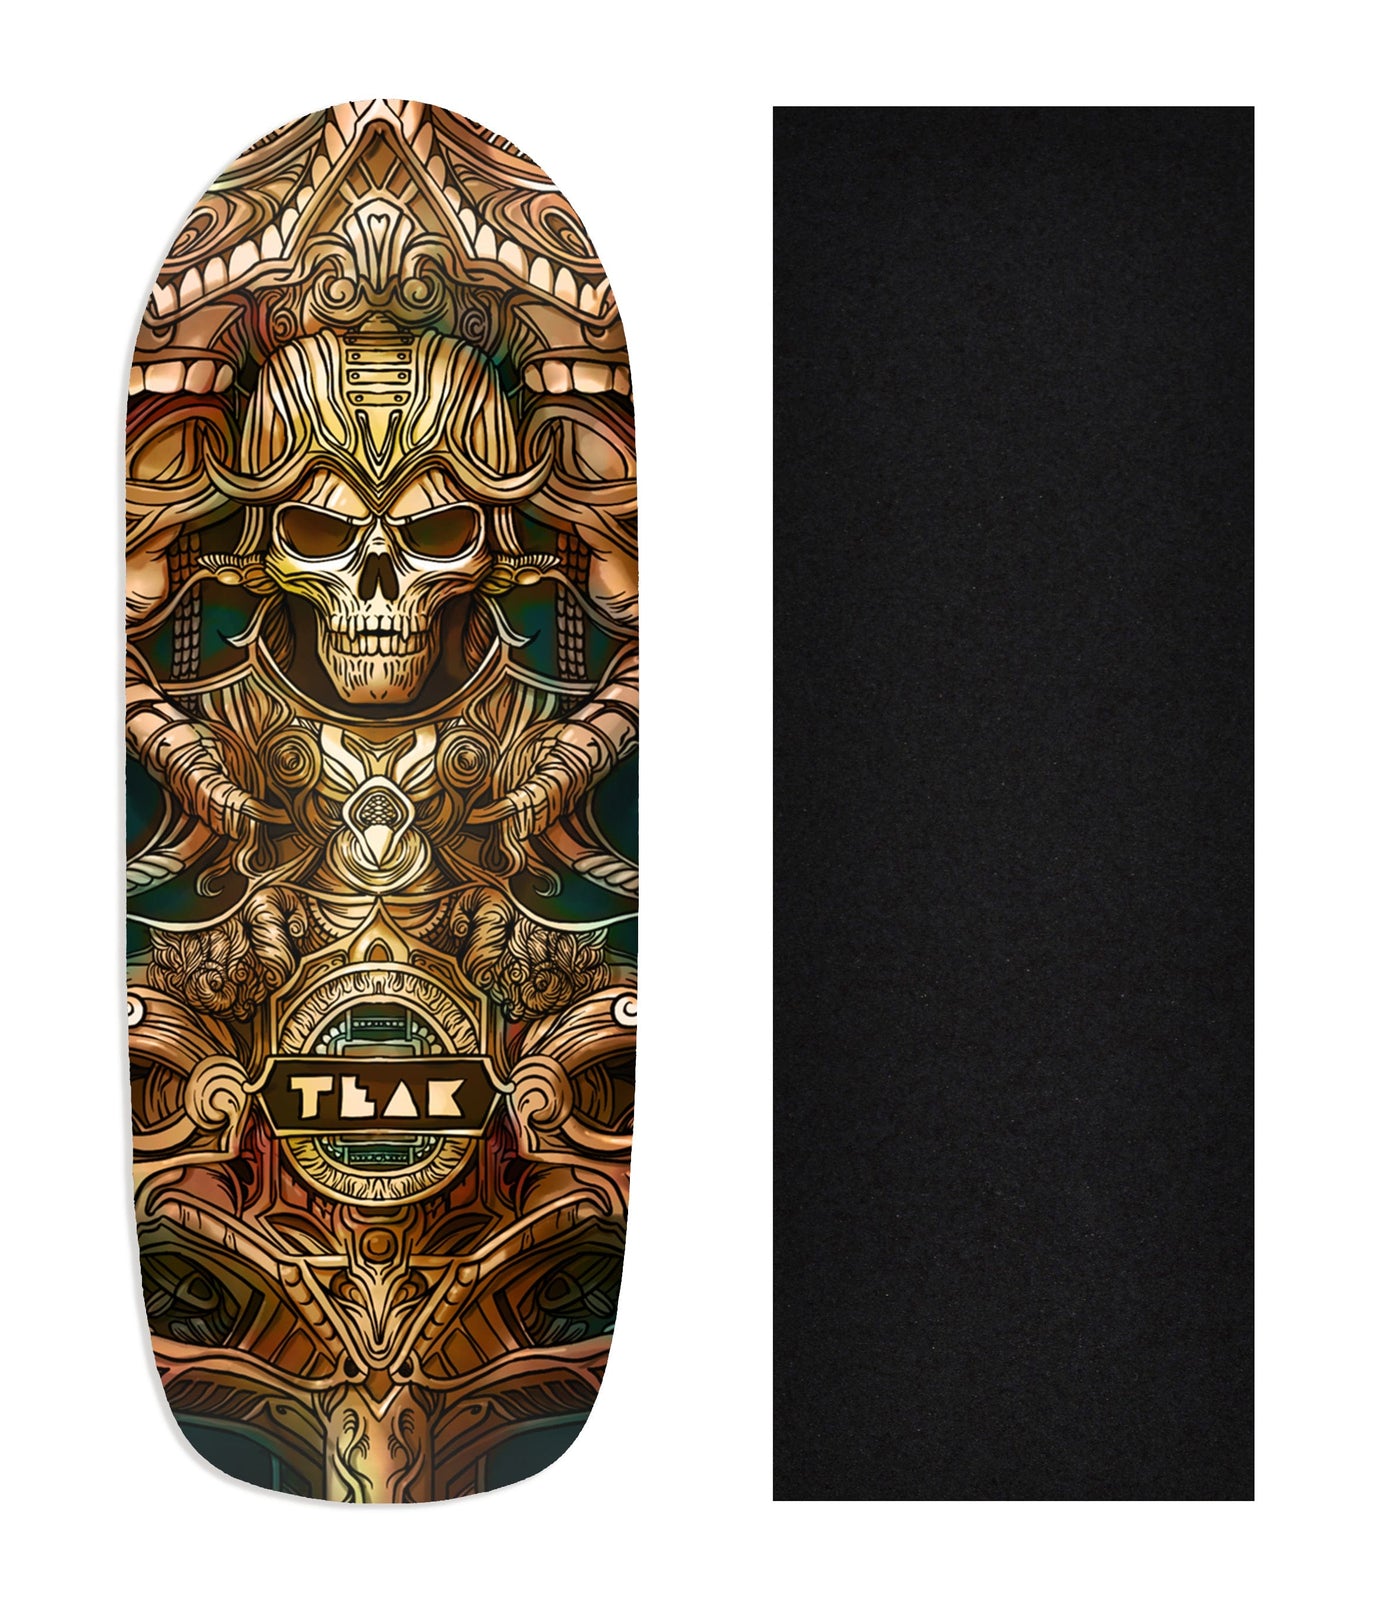 Teak Tuning Heat Transfer Graphic Wooden Fingerboard Deck, "Ancient Ruins" Poolparty Deck